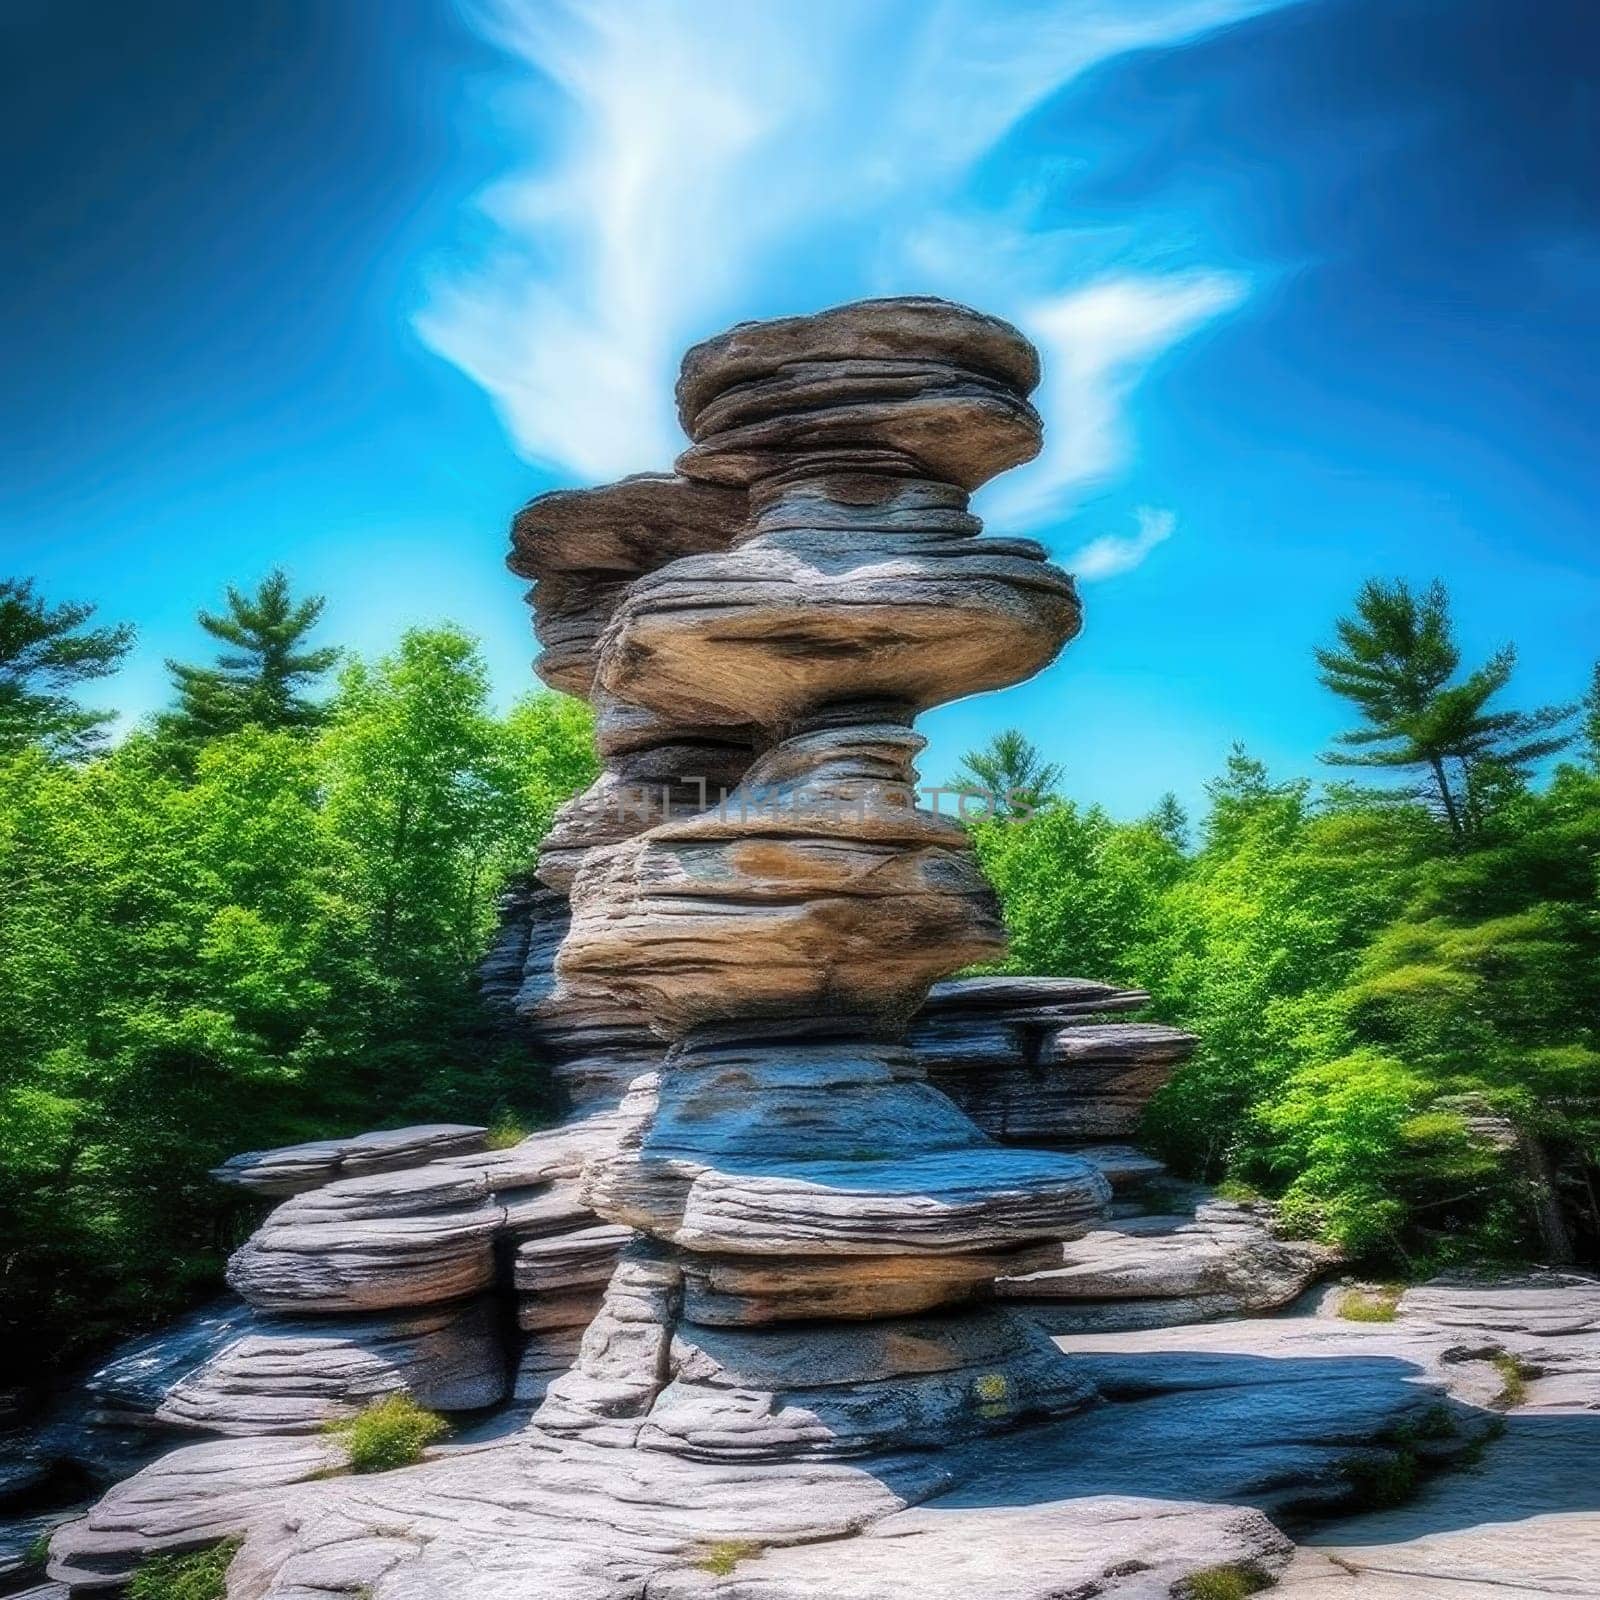 Huge rocks in the forest on a background of blue sky (ID: 001267)